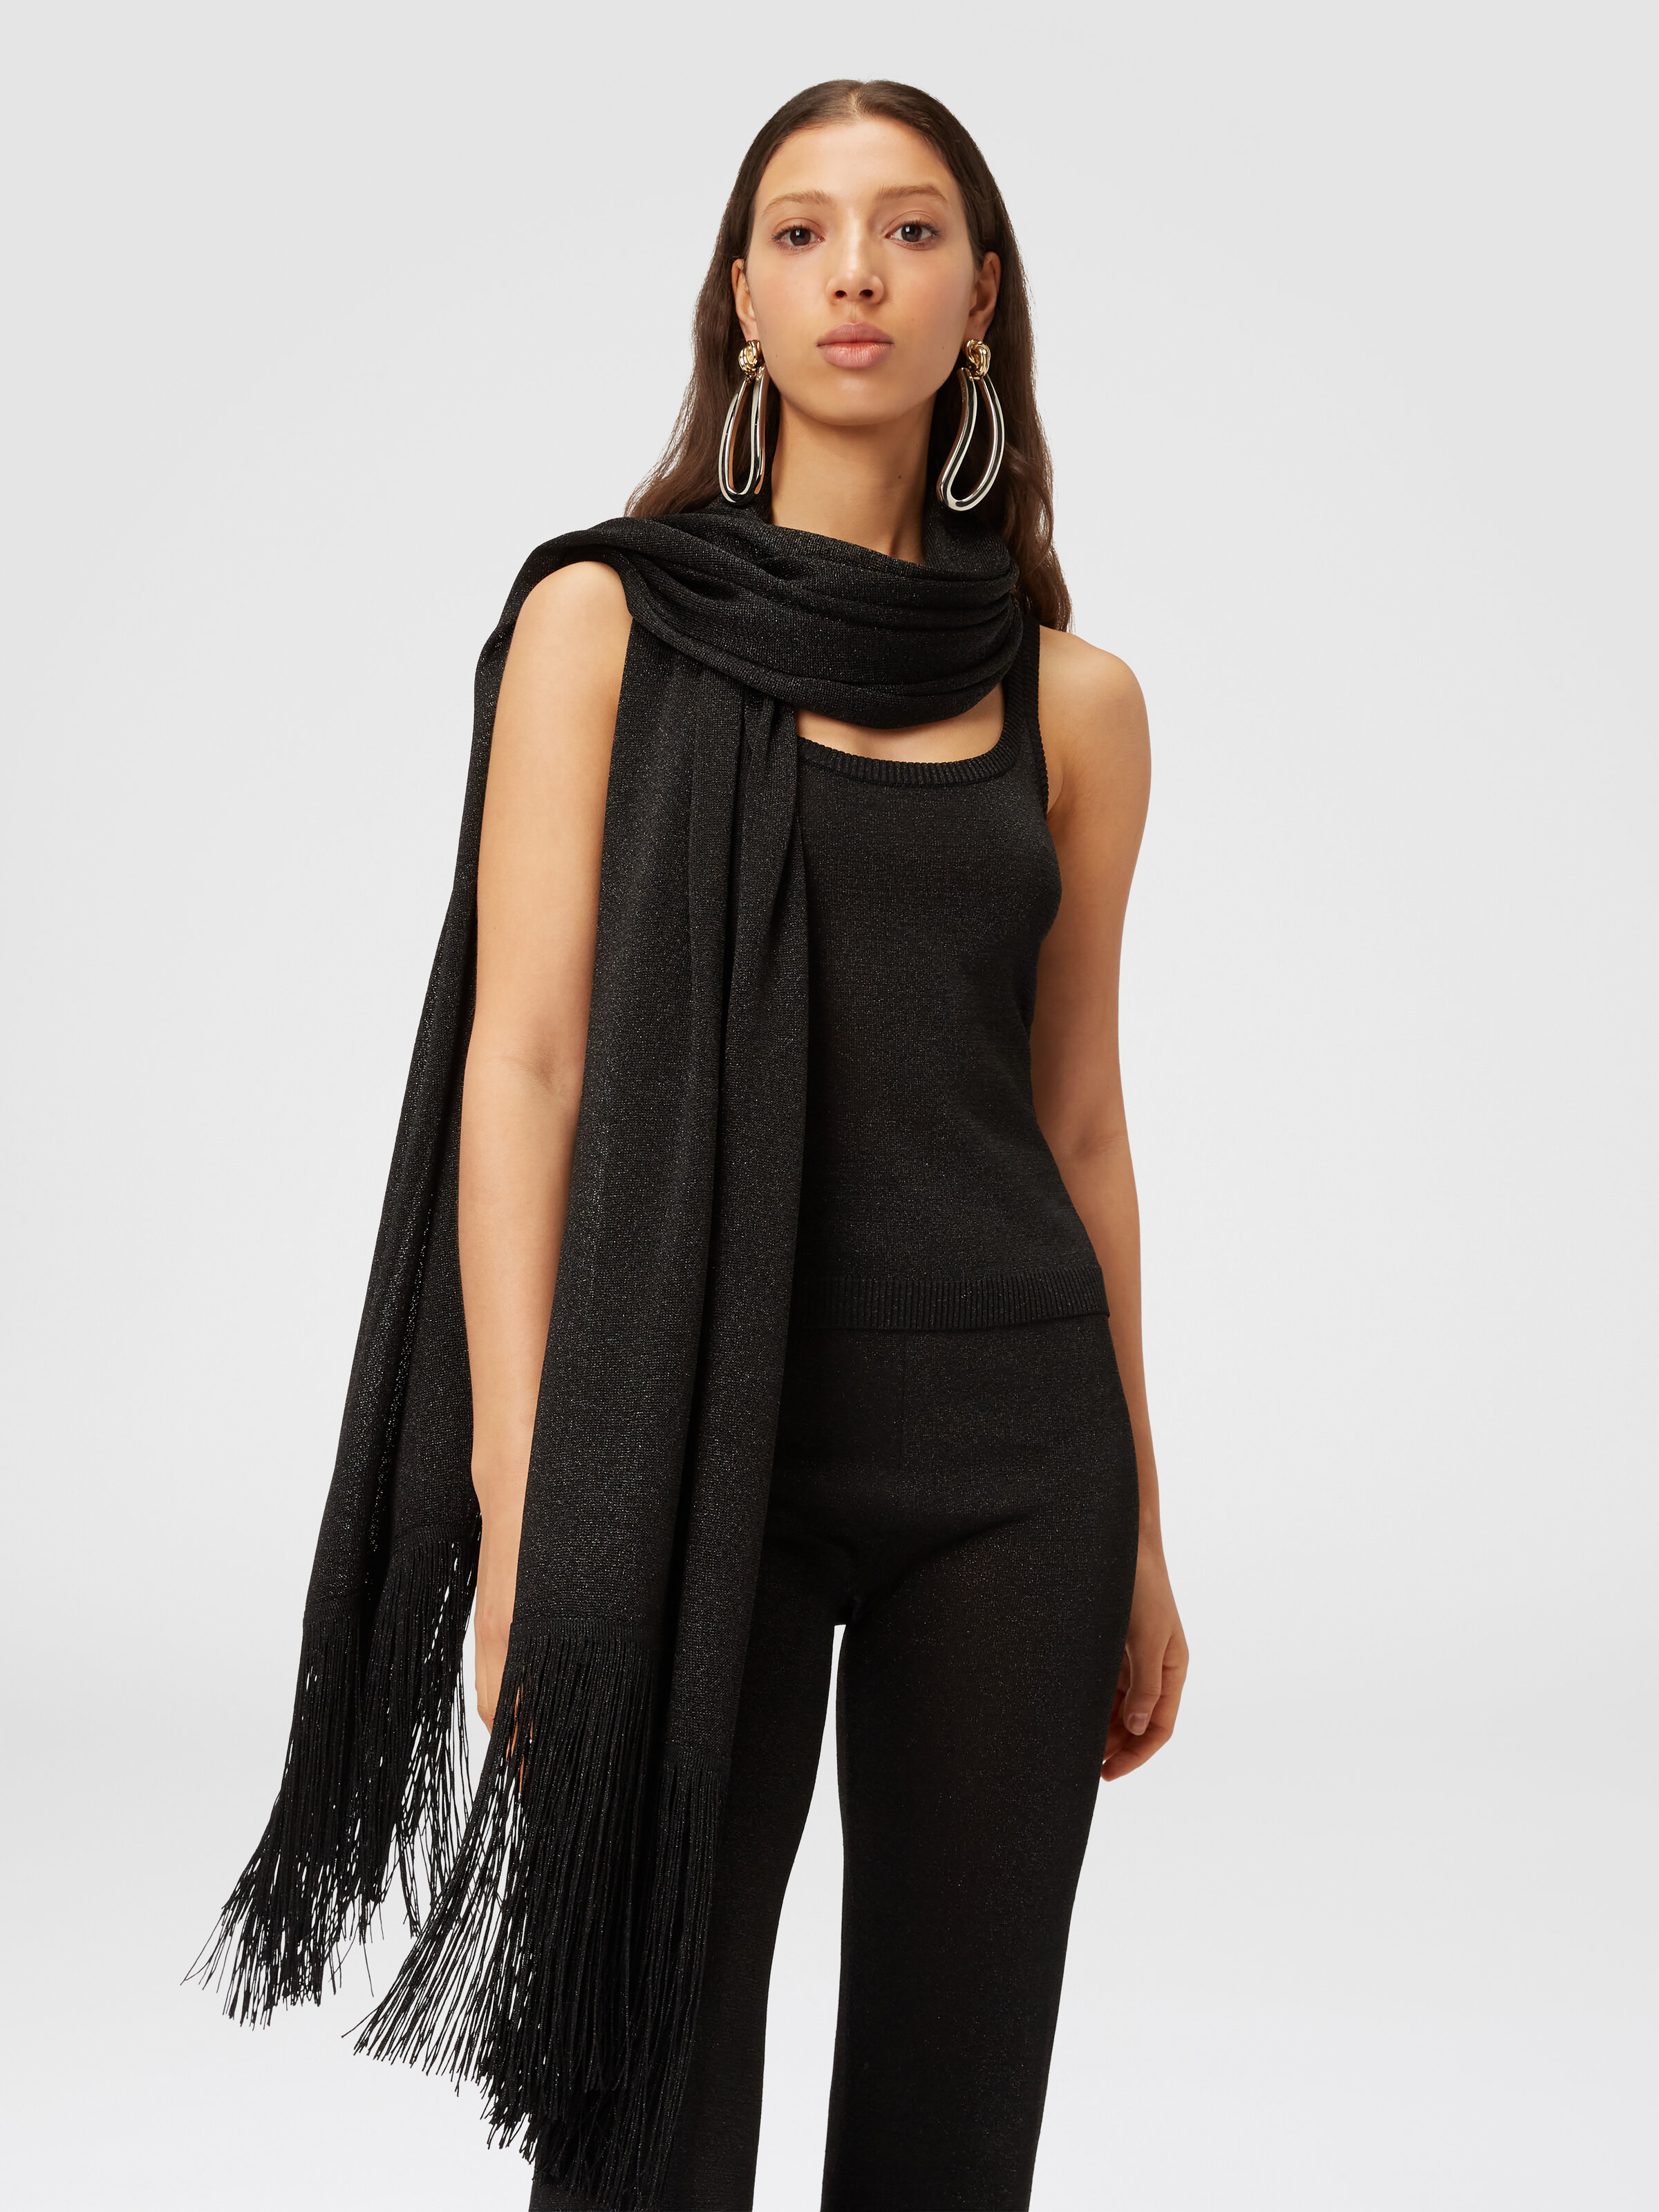 Viscose and nylon knit stole with fringes, Multicoloured  - 2